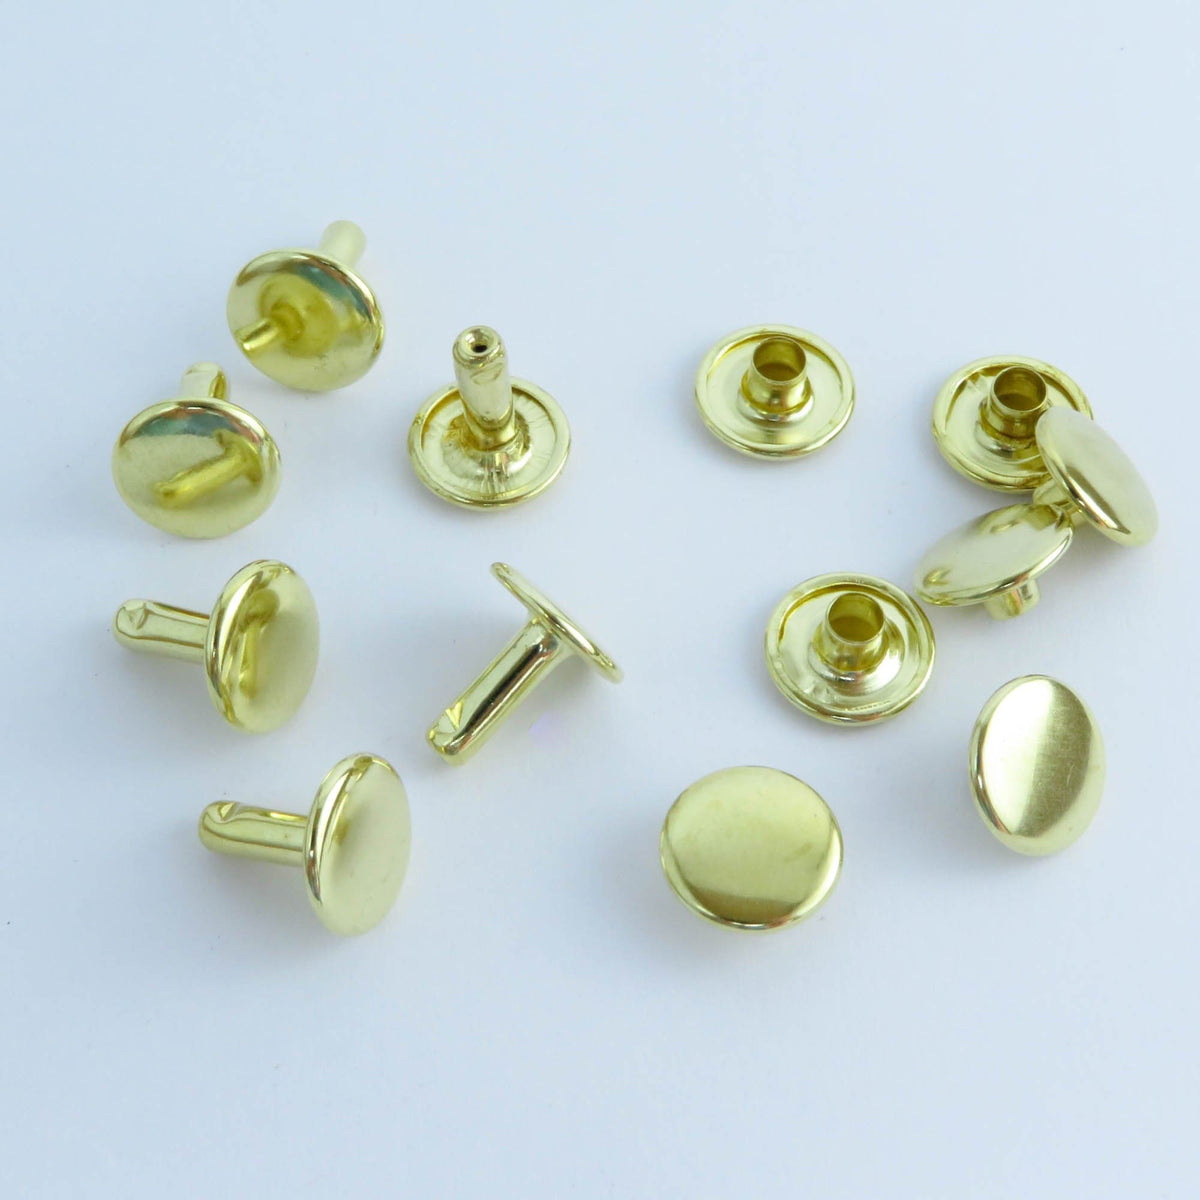 10 MM DOUBLE CAP RIVETS FOR LEATHER AND CRAFTS ATIQUE BRASS/NICKEL/BRASS/BLACK NICKEL AVAILABLE